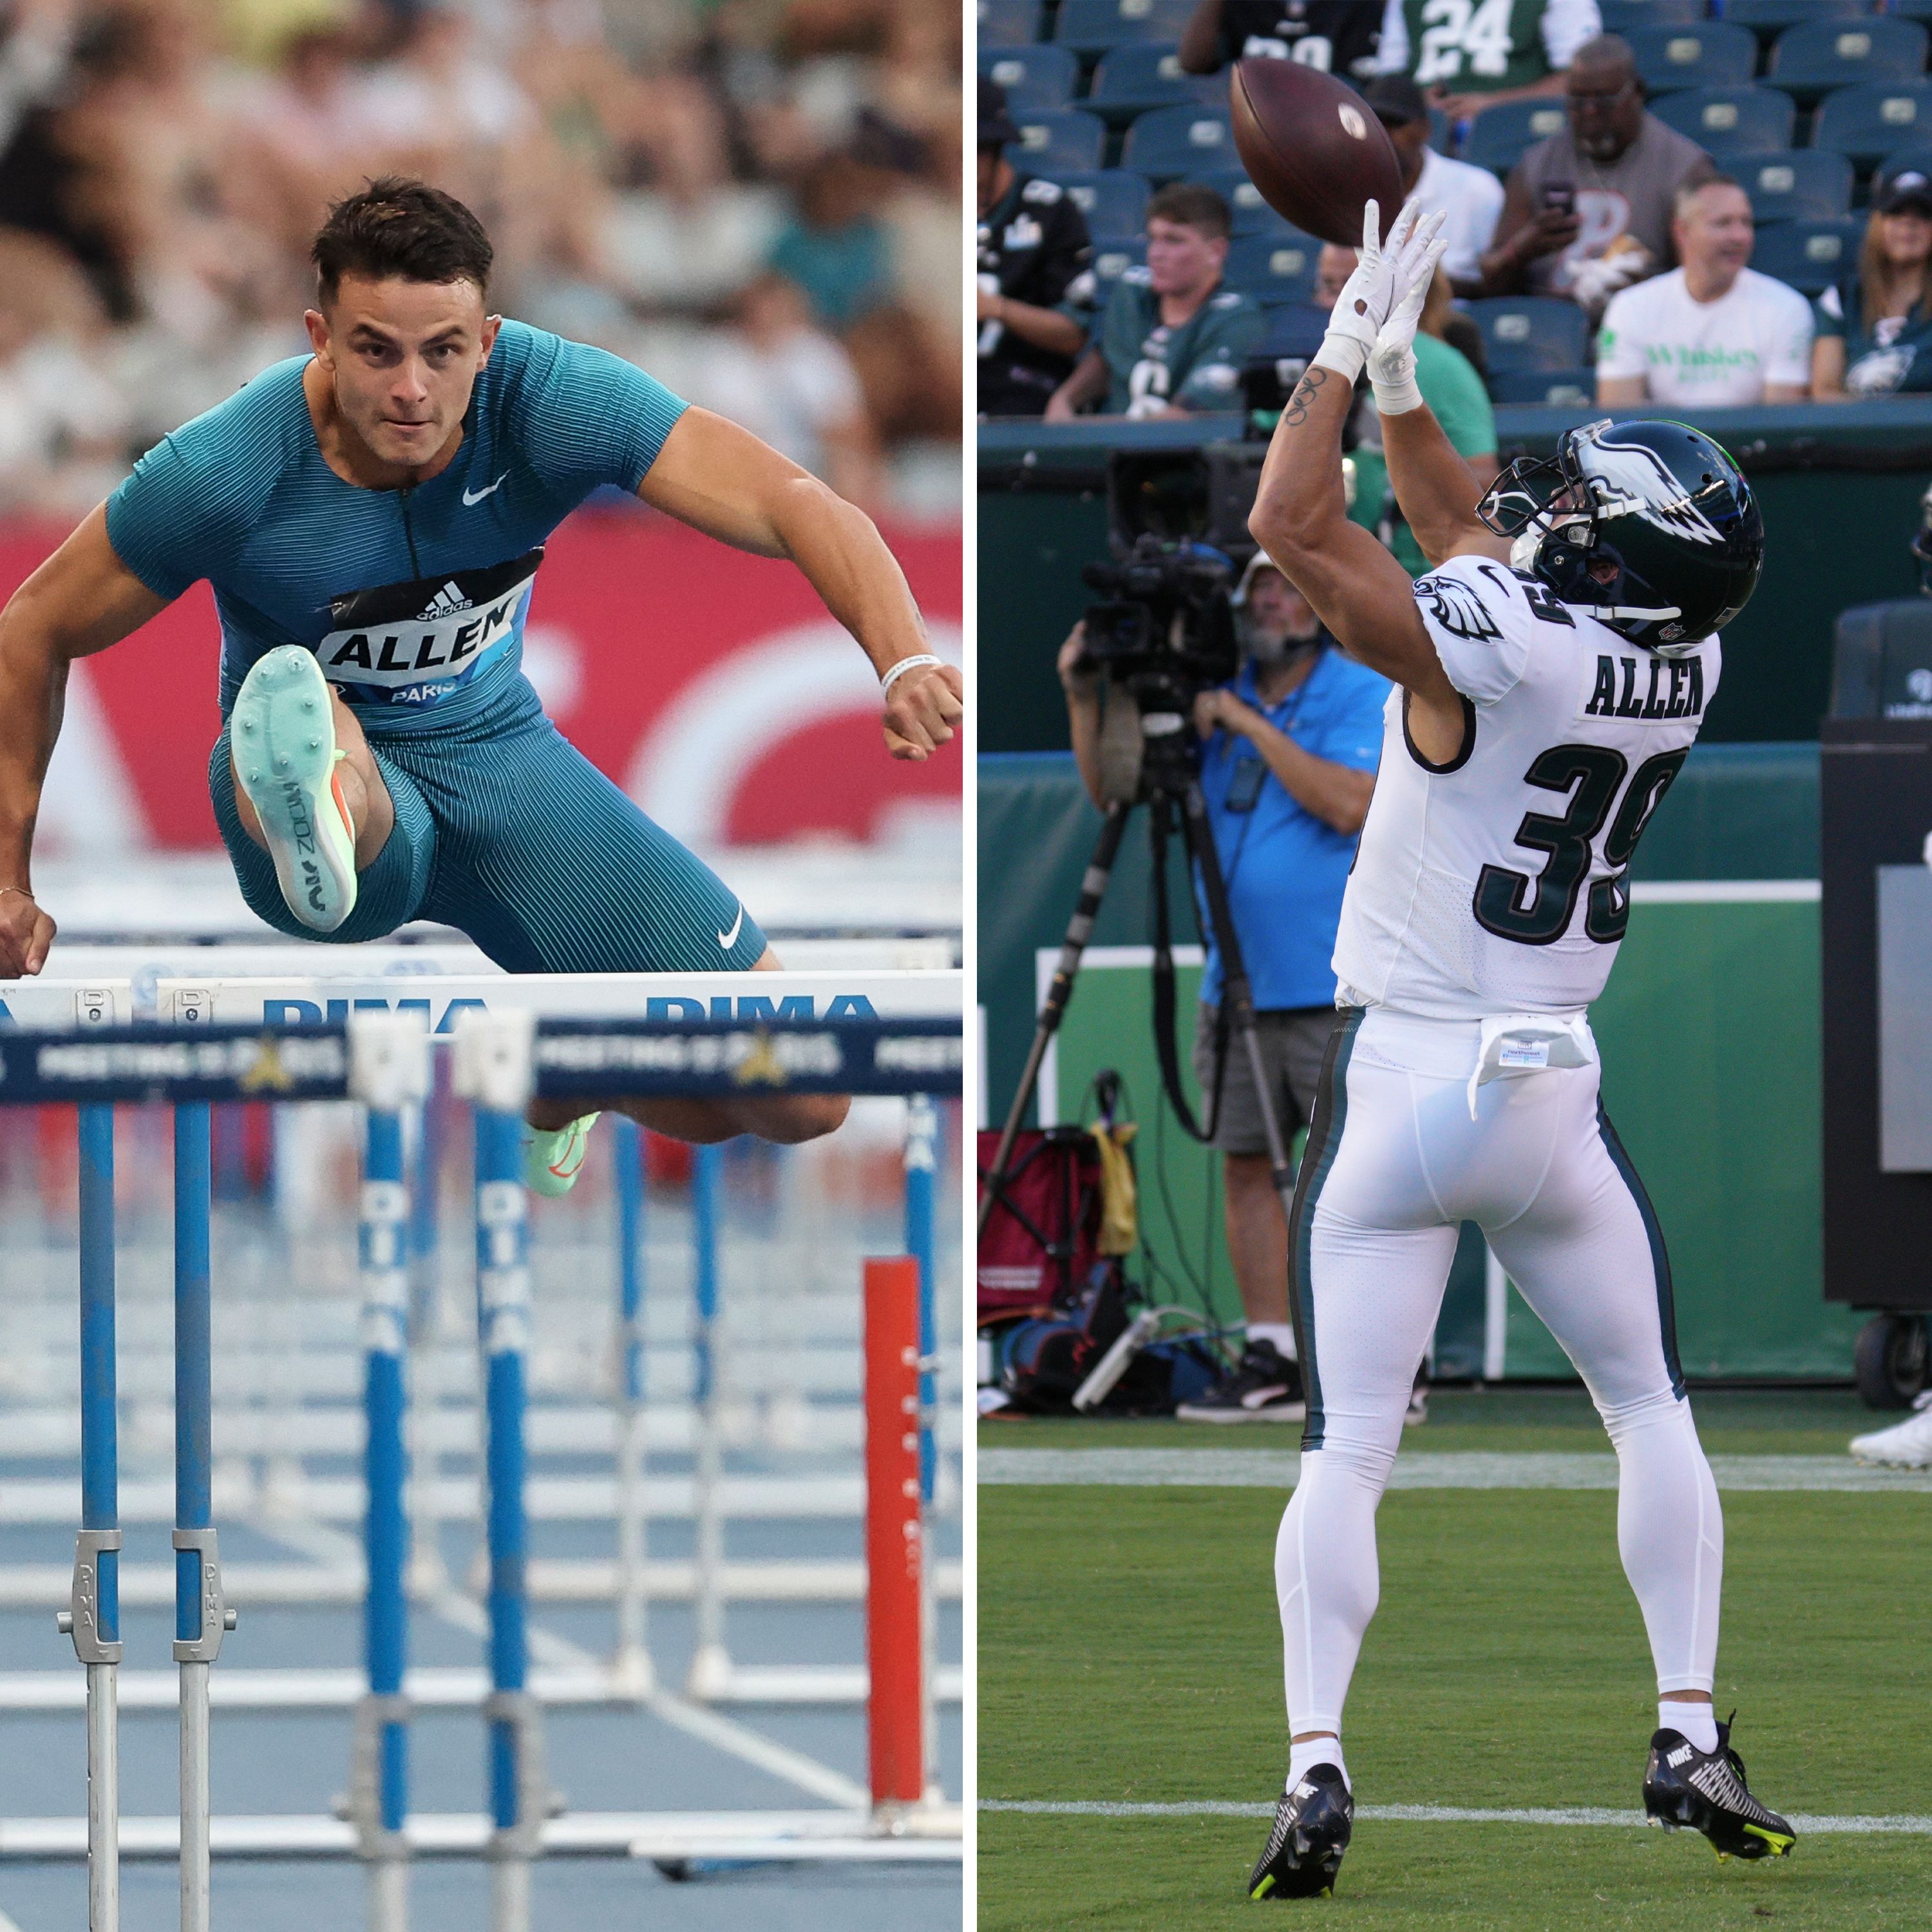 Devon Allen Training to Be the Fastest on the Track and on Eagles